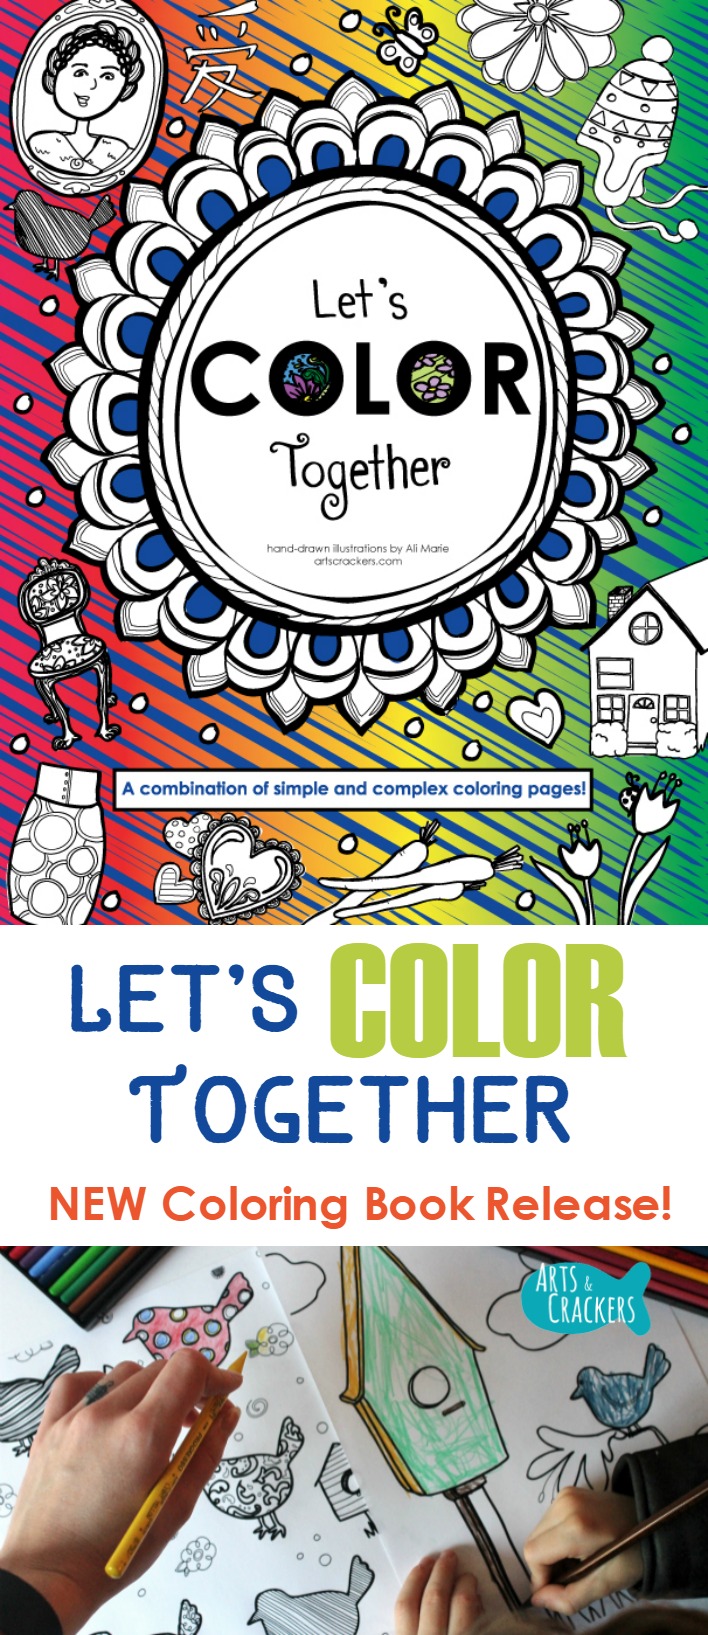 "Let's Color Together" New Coloring Book Release Update